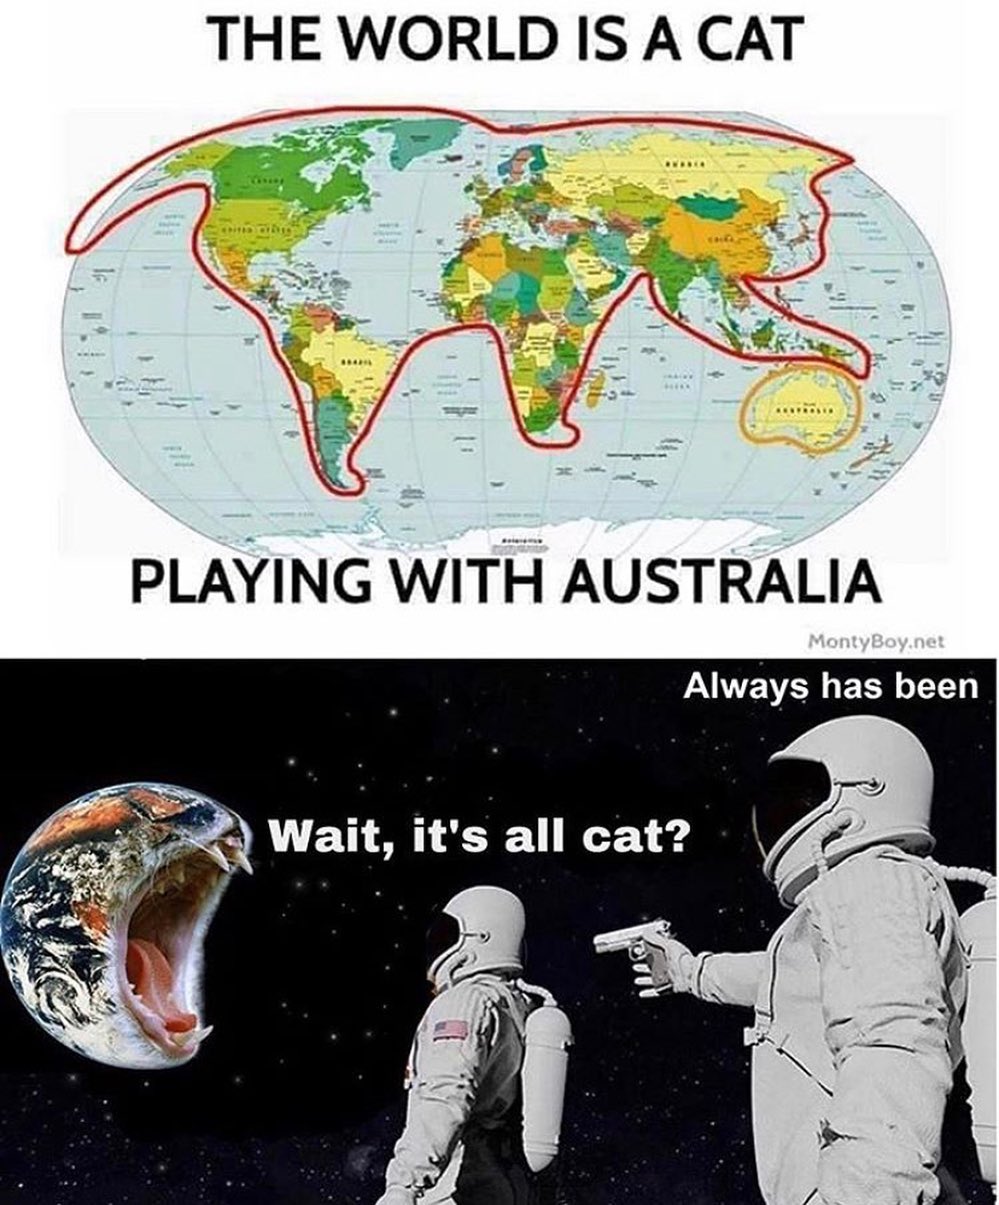 world cat playing with australia - The World Is A Cat Dinis 8 Playing With Australia MontyBoy.net Always has been Wait, it's all cat?